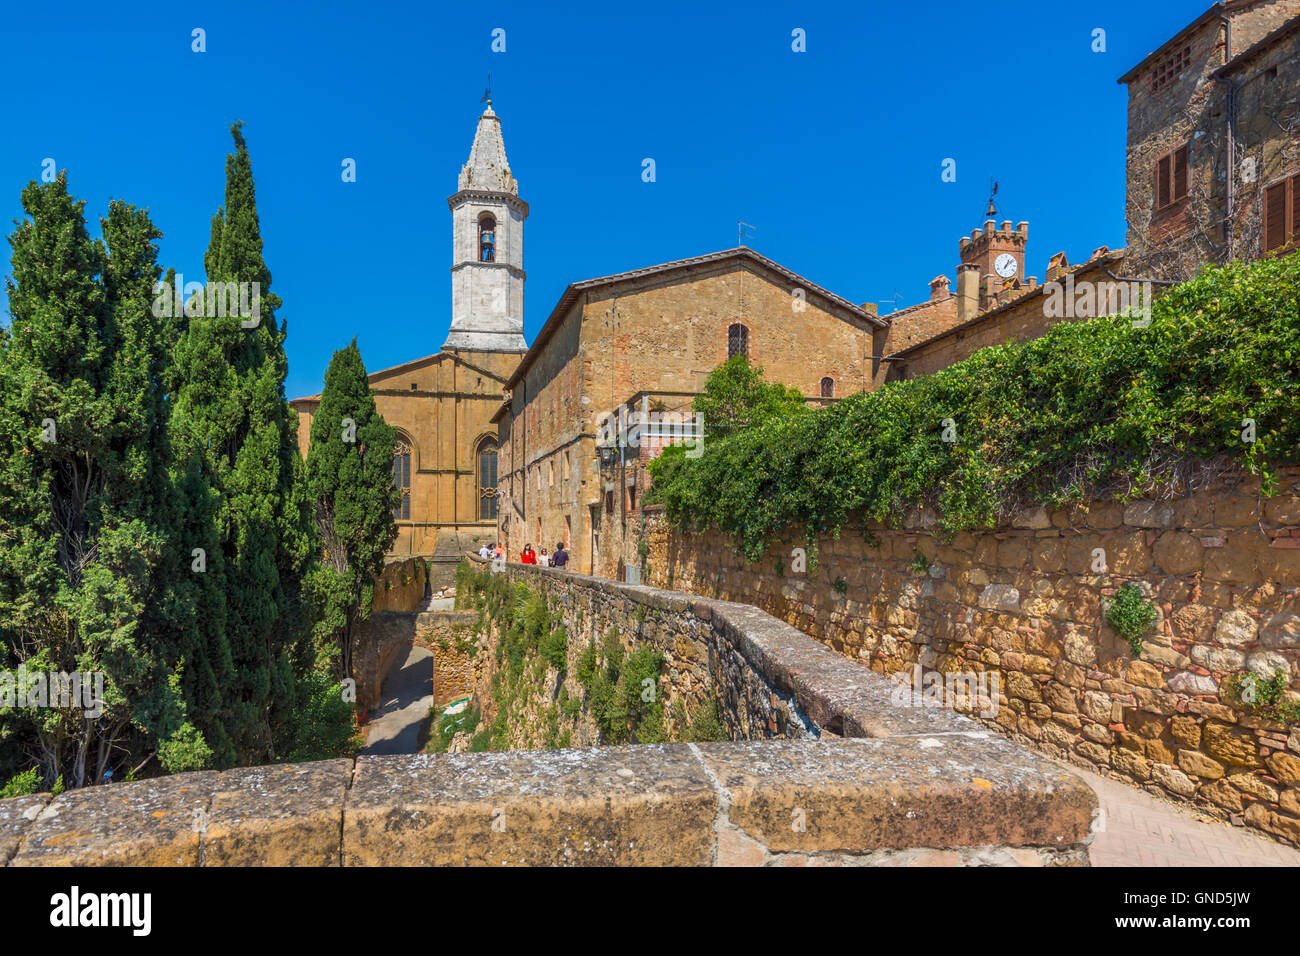 Pienza, Siena Province, Tuscany, Italy.  View from walk along city walls to the tower of Cattedrale di Santa Maria Assunta Stock Photo